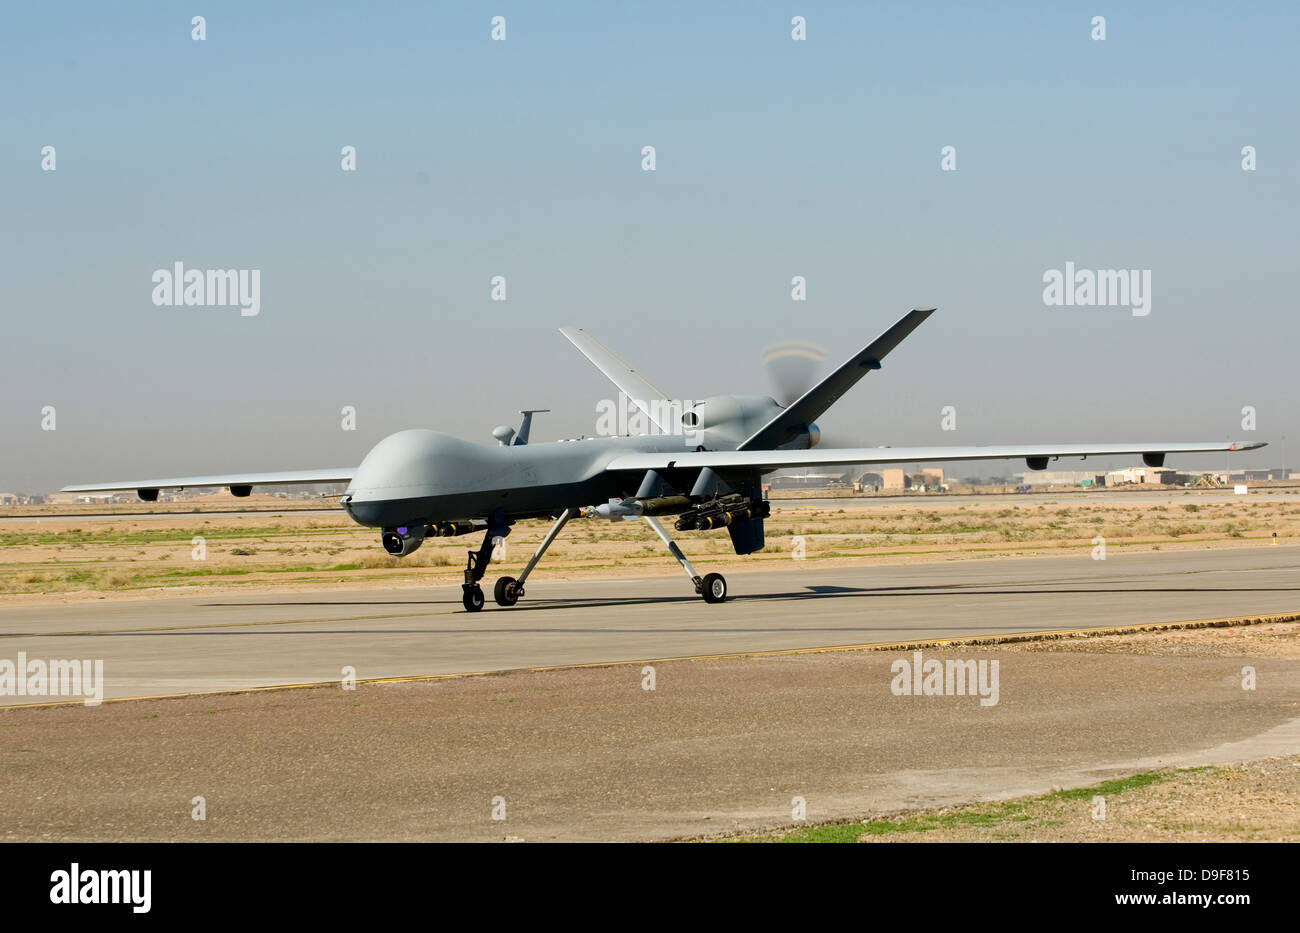 November 10, 2008 - A U.S. Air Force MQ-9 Reaper unmanned aerial vehicle lands at Joint Base Balad, Iraq. Stock Photo